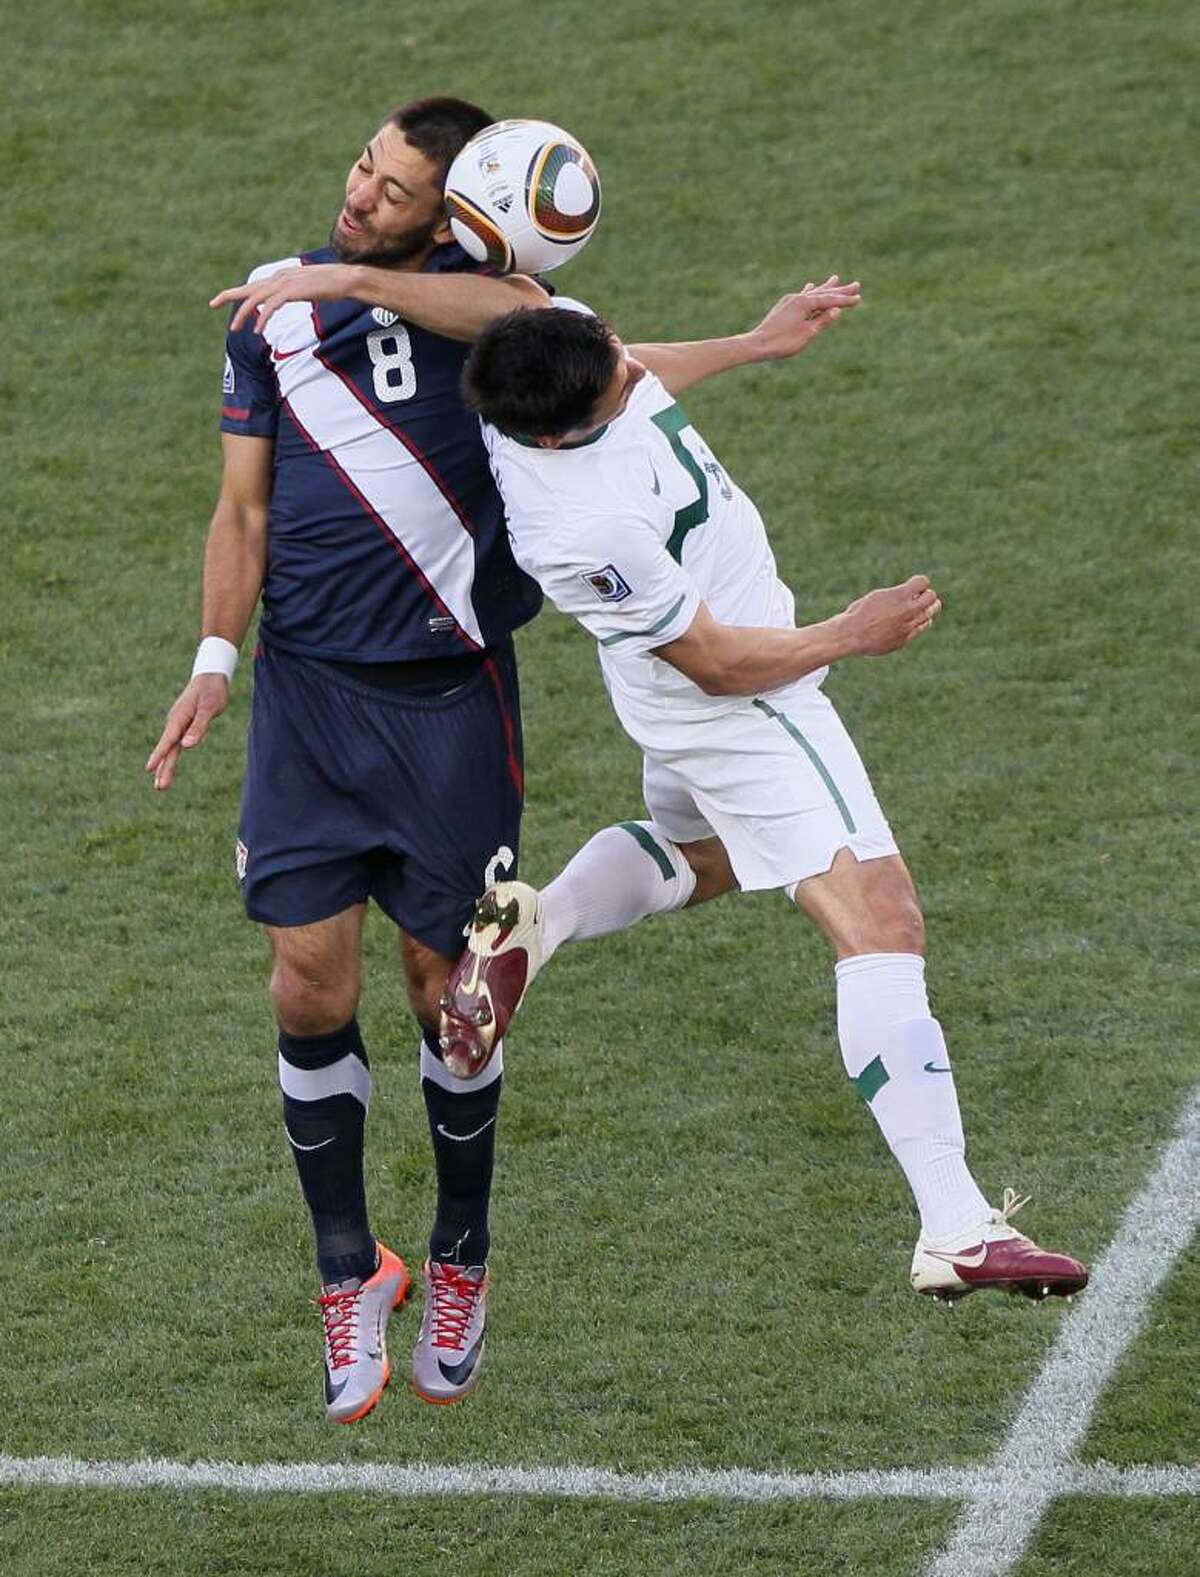 JOHANNESBURG, SOUTH AFRICA - JUNE 18: Clint Dempsey of the United States goes up for a challenge with Zlatan Ljubijankic of Slovenia during the 2010 FIFA World Cup South Africa Group C match between Slovenia and USA at Ellis Park Stadium on June 18, 2010 in Johannesburg, South Africa. (Photo by Christof Koepsel/Getty Images) *** Local Caption *** Clint Dempsey;Zlatan Ljubijankic